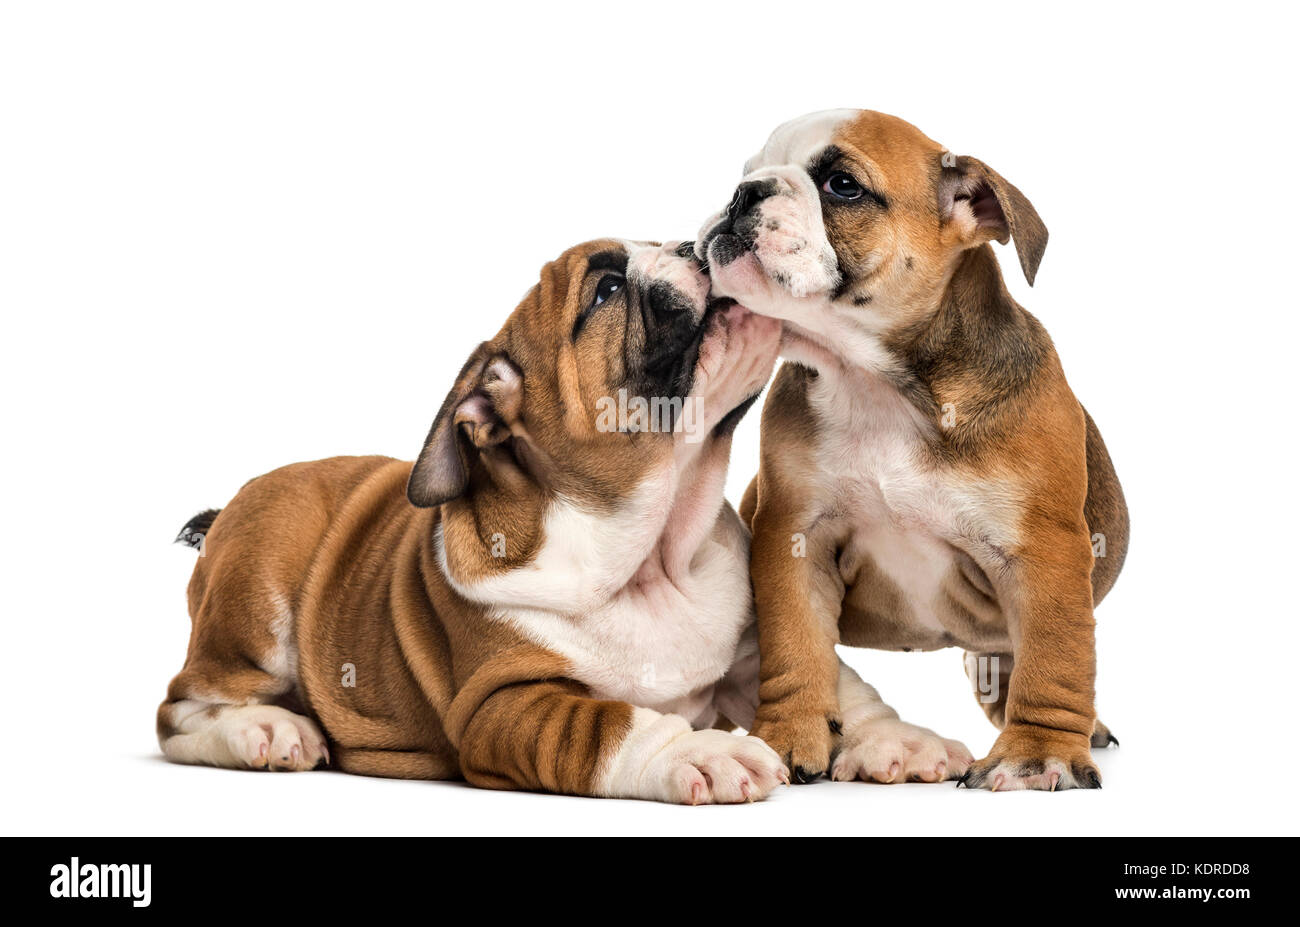 Bulldog anglais chiots câlins, isolated on white Banque D'Images